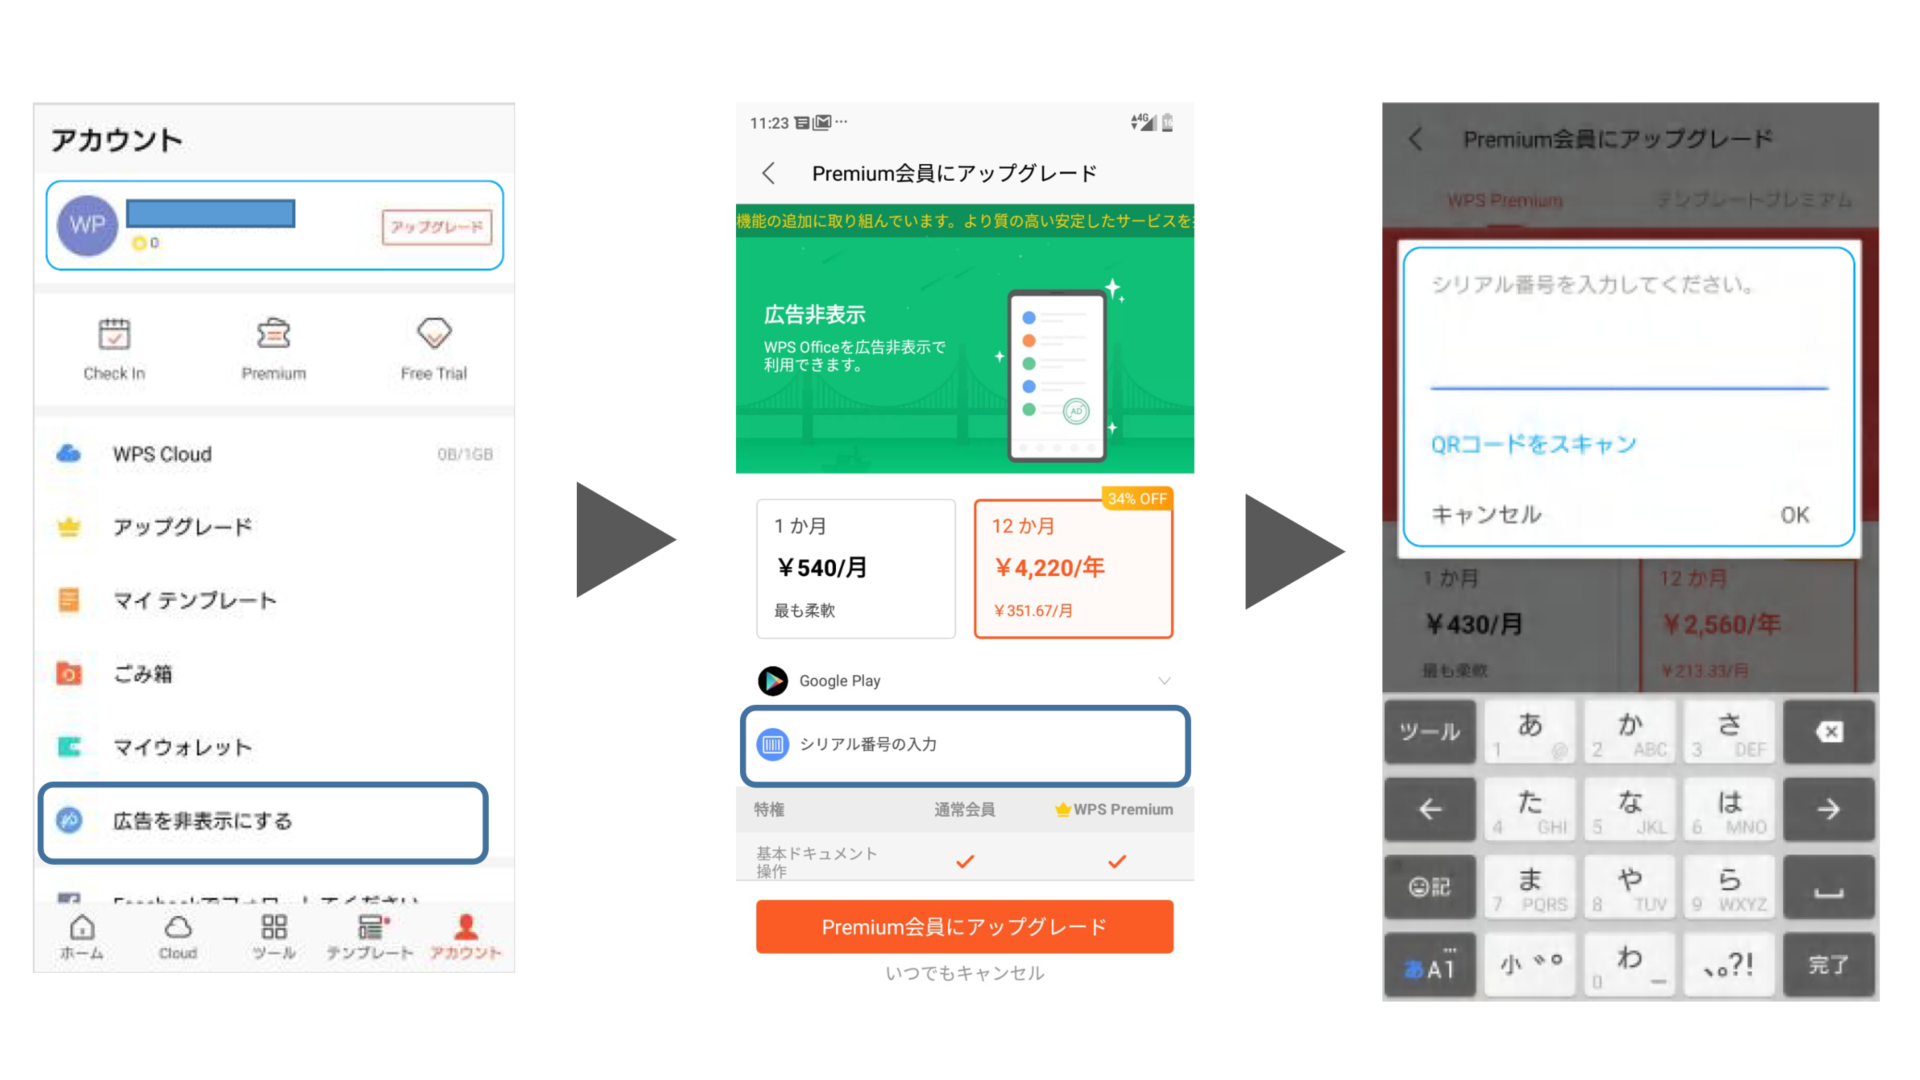 WPS Office for Android シリアル番号の入力手順